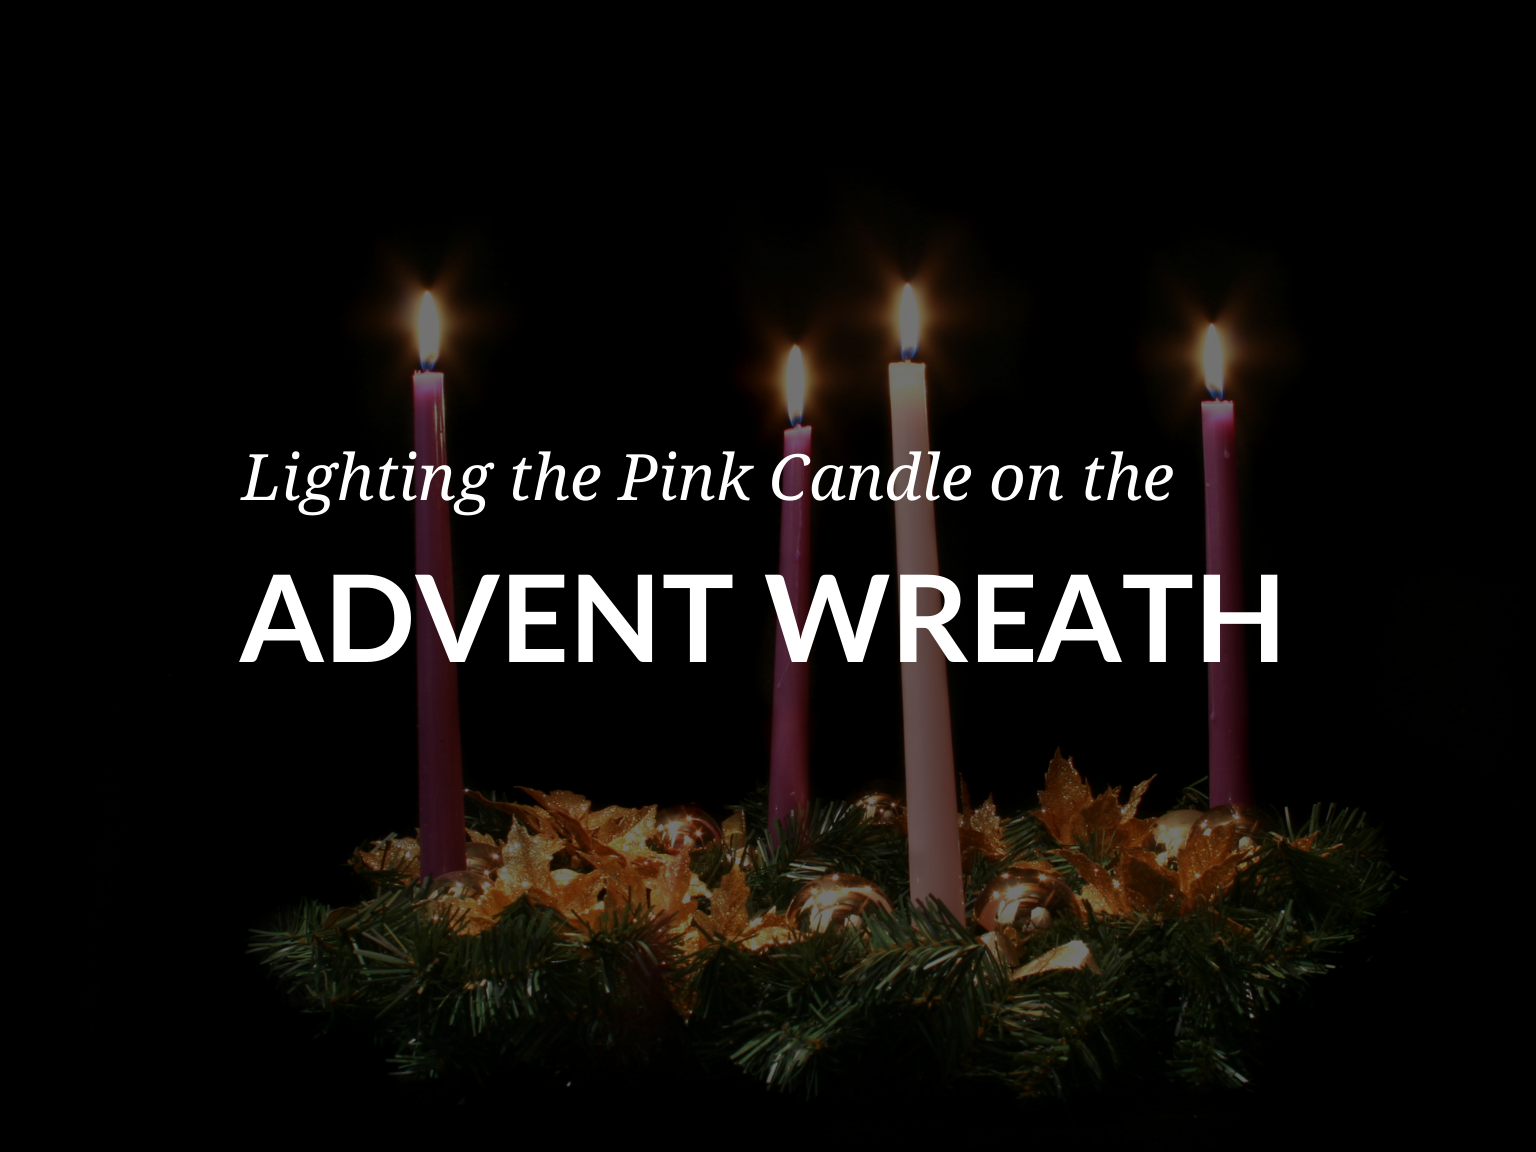 Lighting the Pink Candle on Wreath